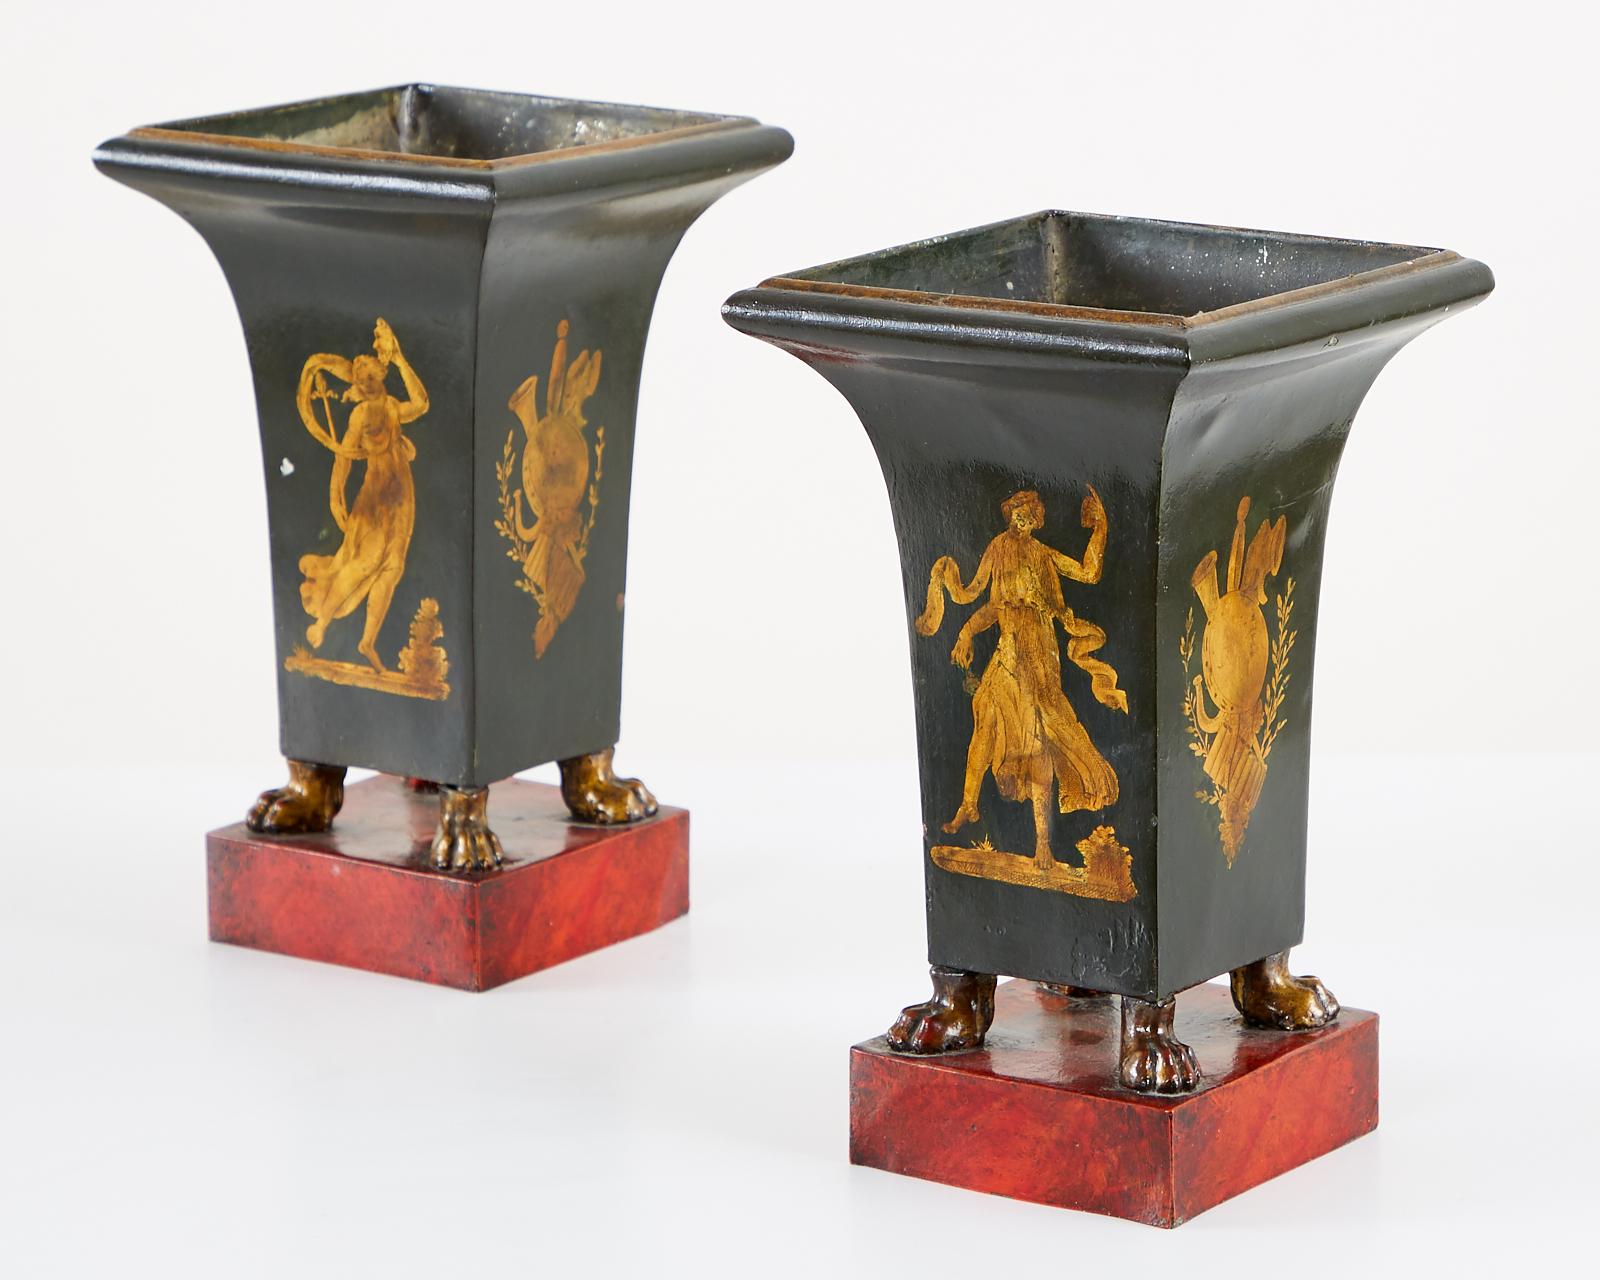 Stunning pair of French vases, urns, cachepots, or garniture set. Featuring neoclassical Directoire style motifs of a muse and musical trophy. The vase is supported by paw feet with a gilt finish and mounted to a faux marble plinth.

Provenance: